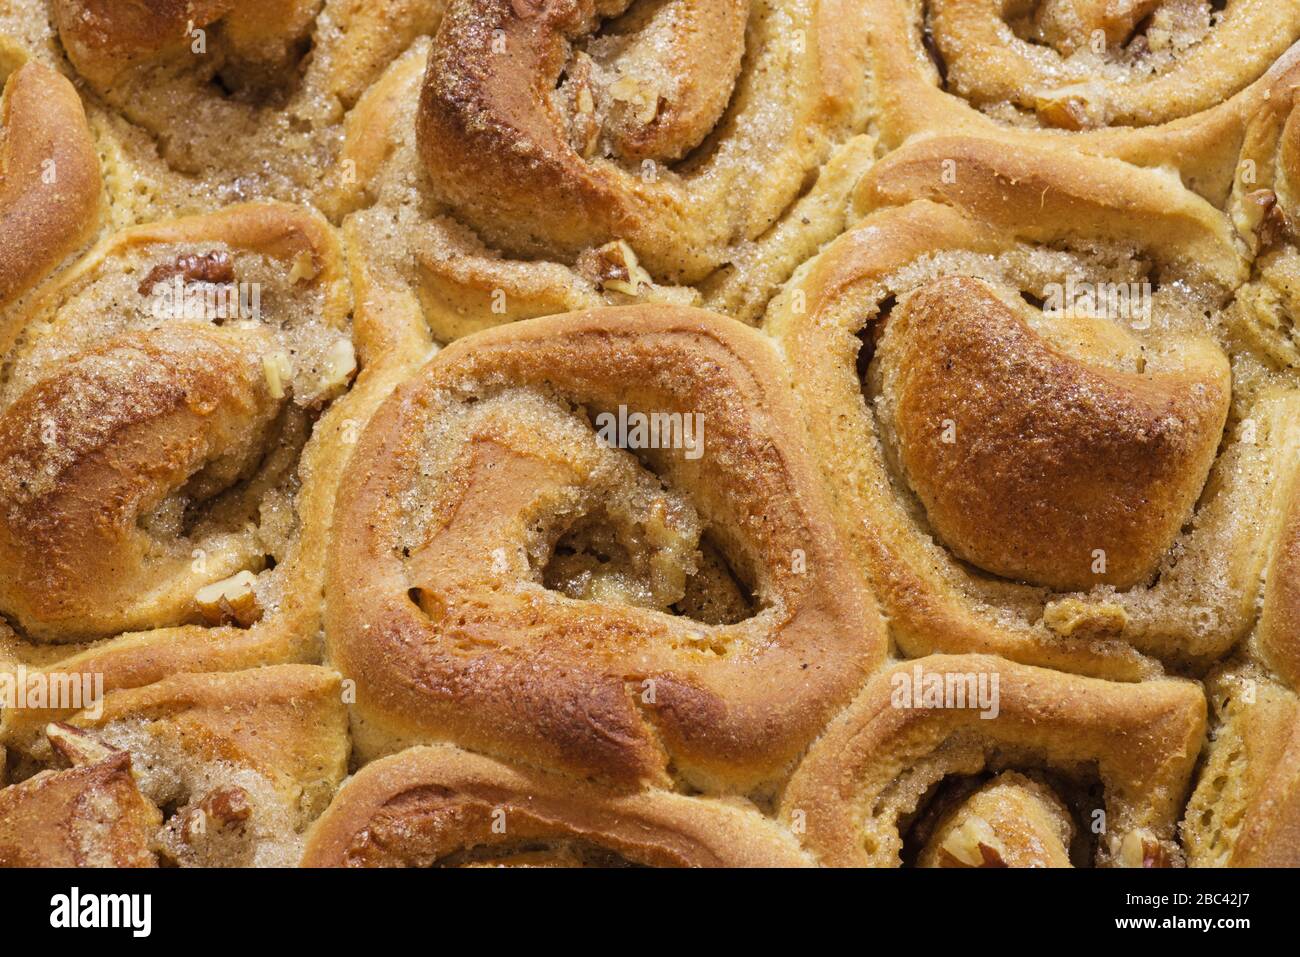 detail of a pan of homemade sticky bun rolls fresh out of the oven Stock Photo